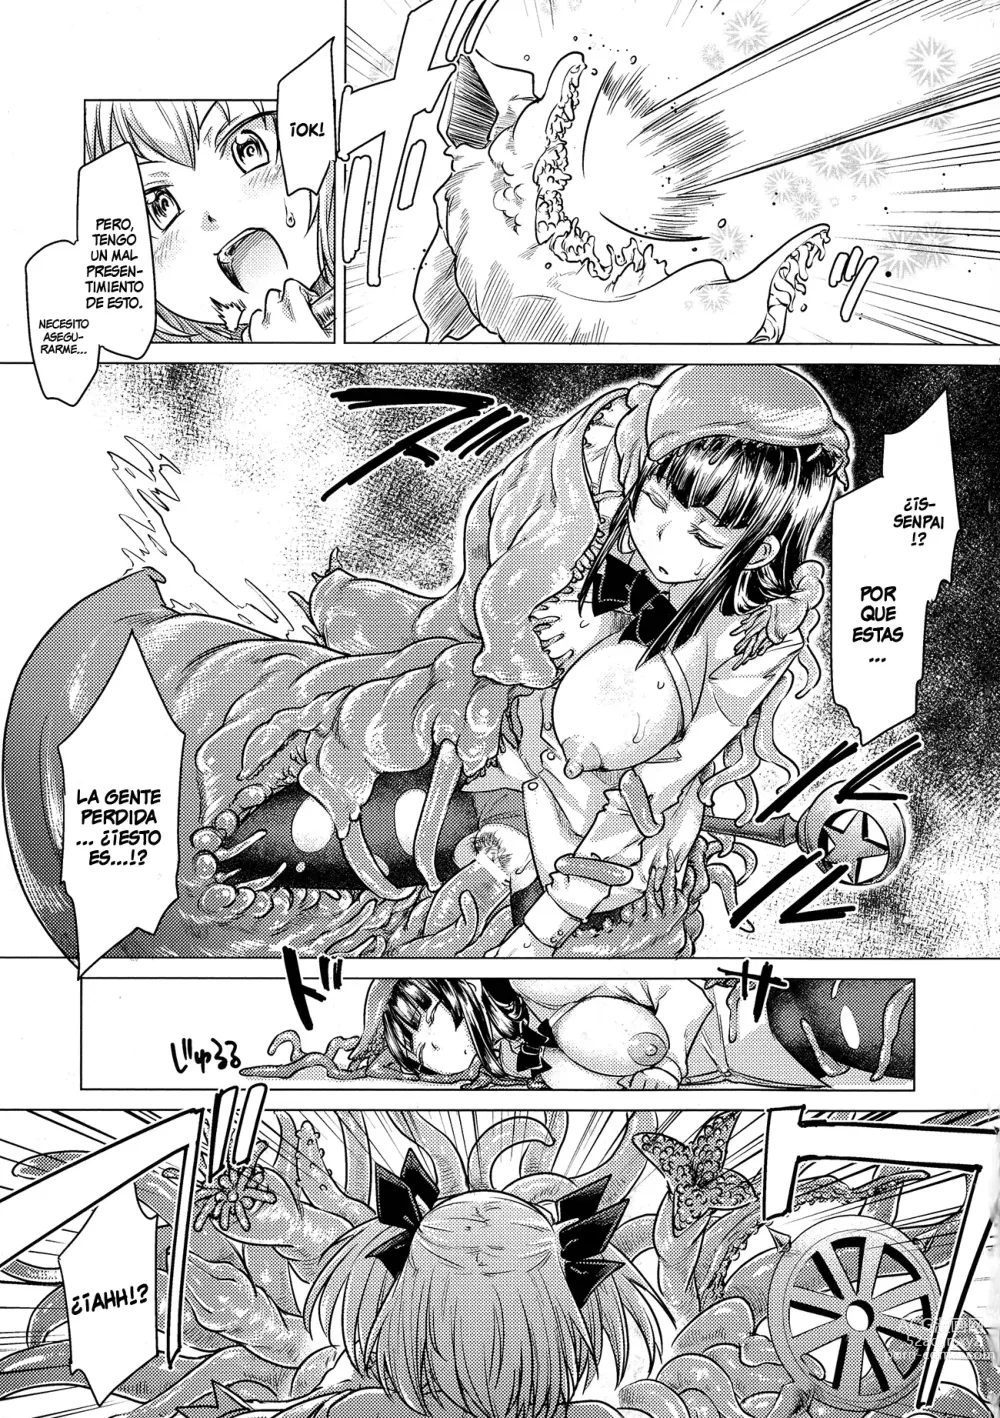 Page 3 of manga Tentacle Maiden